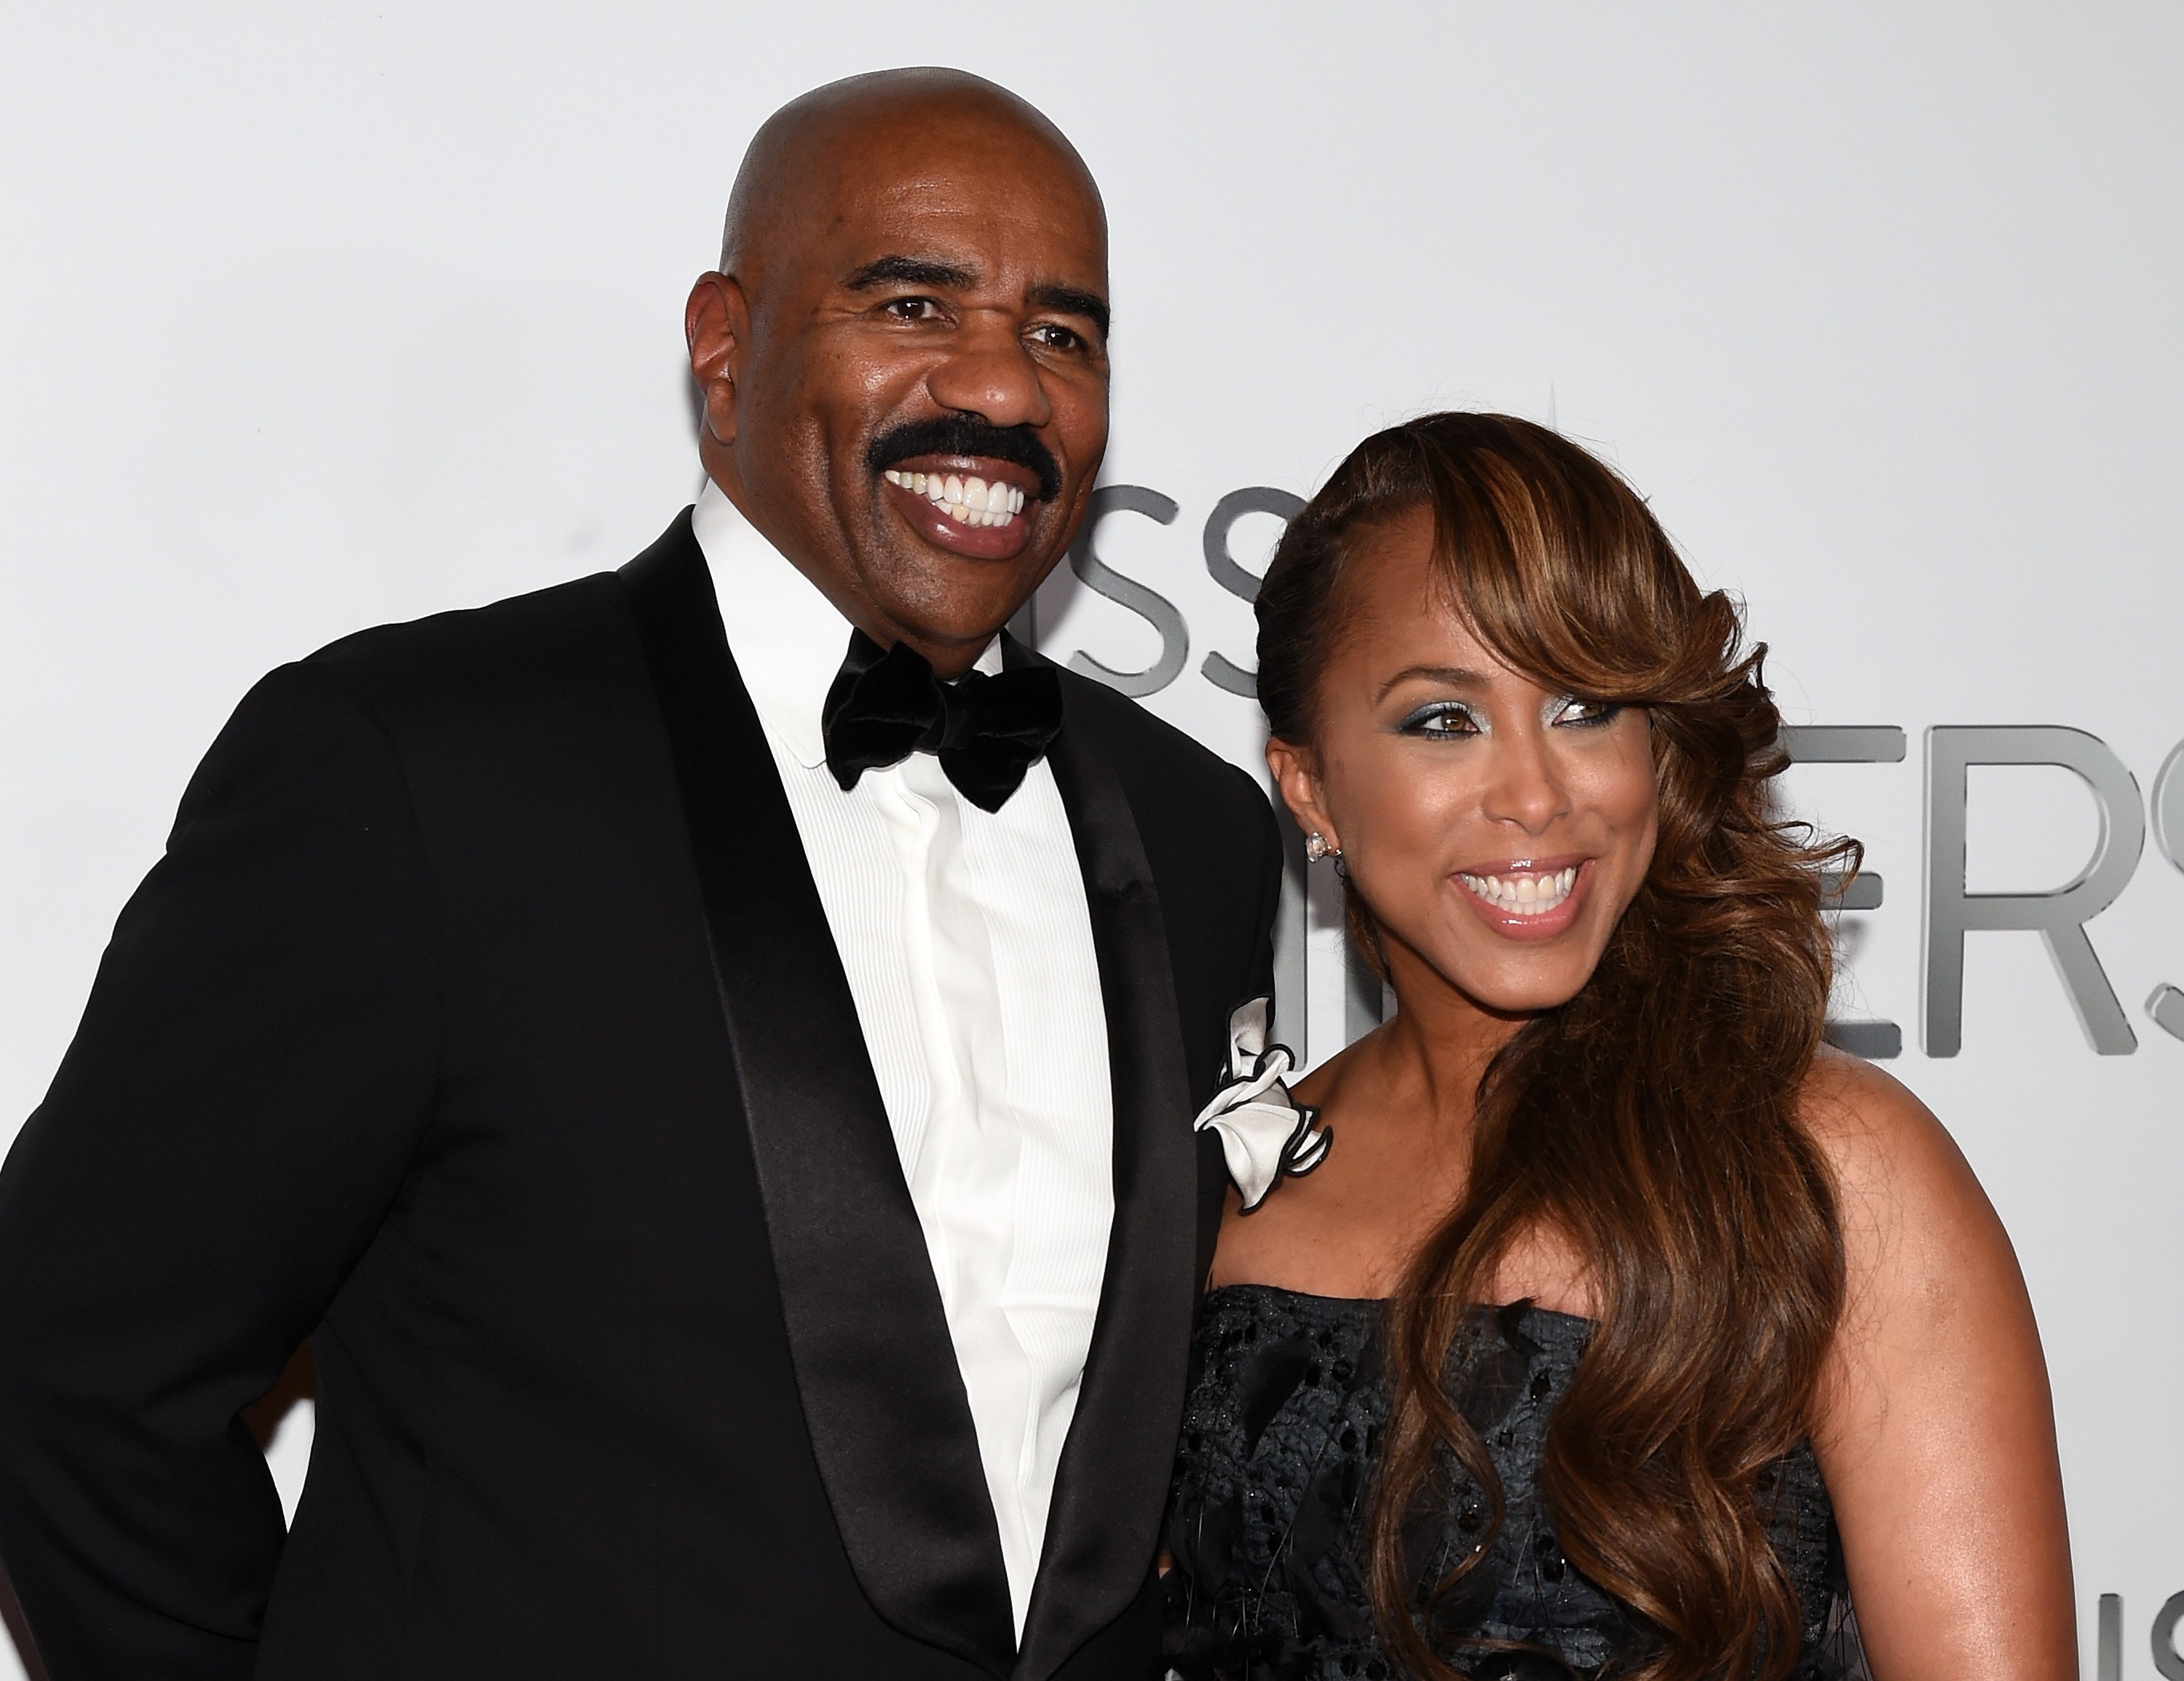 Steve & Marjorie Harvey at the 2015 Miss Universe Pageant on Dec. 20, 2015 in Las Vegas | Photo: Getty Images